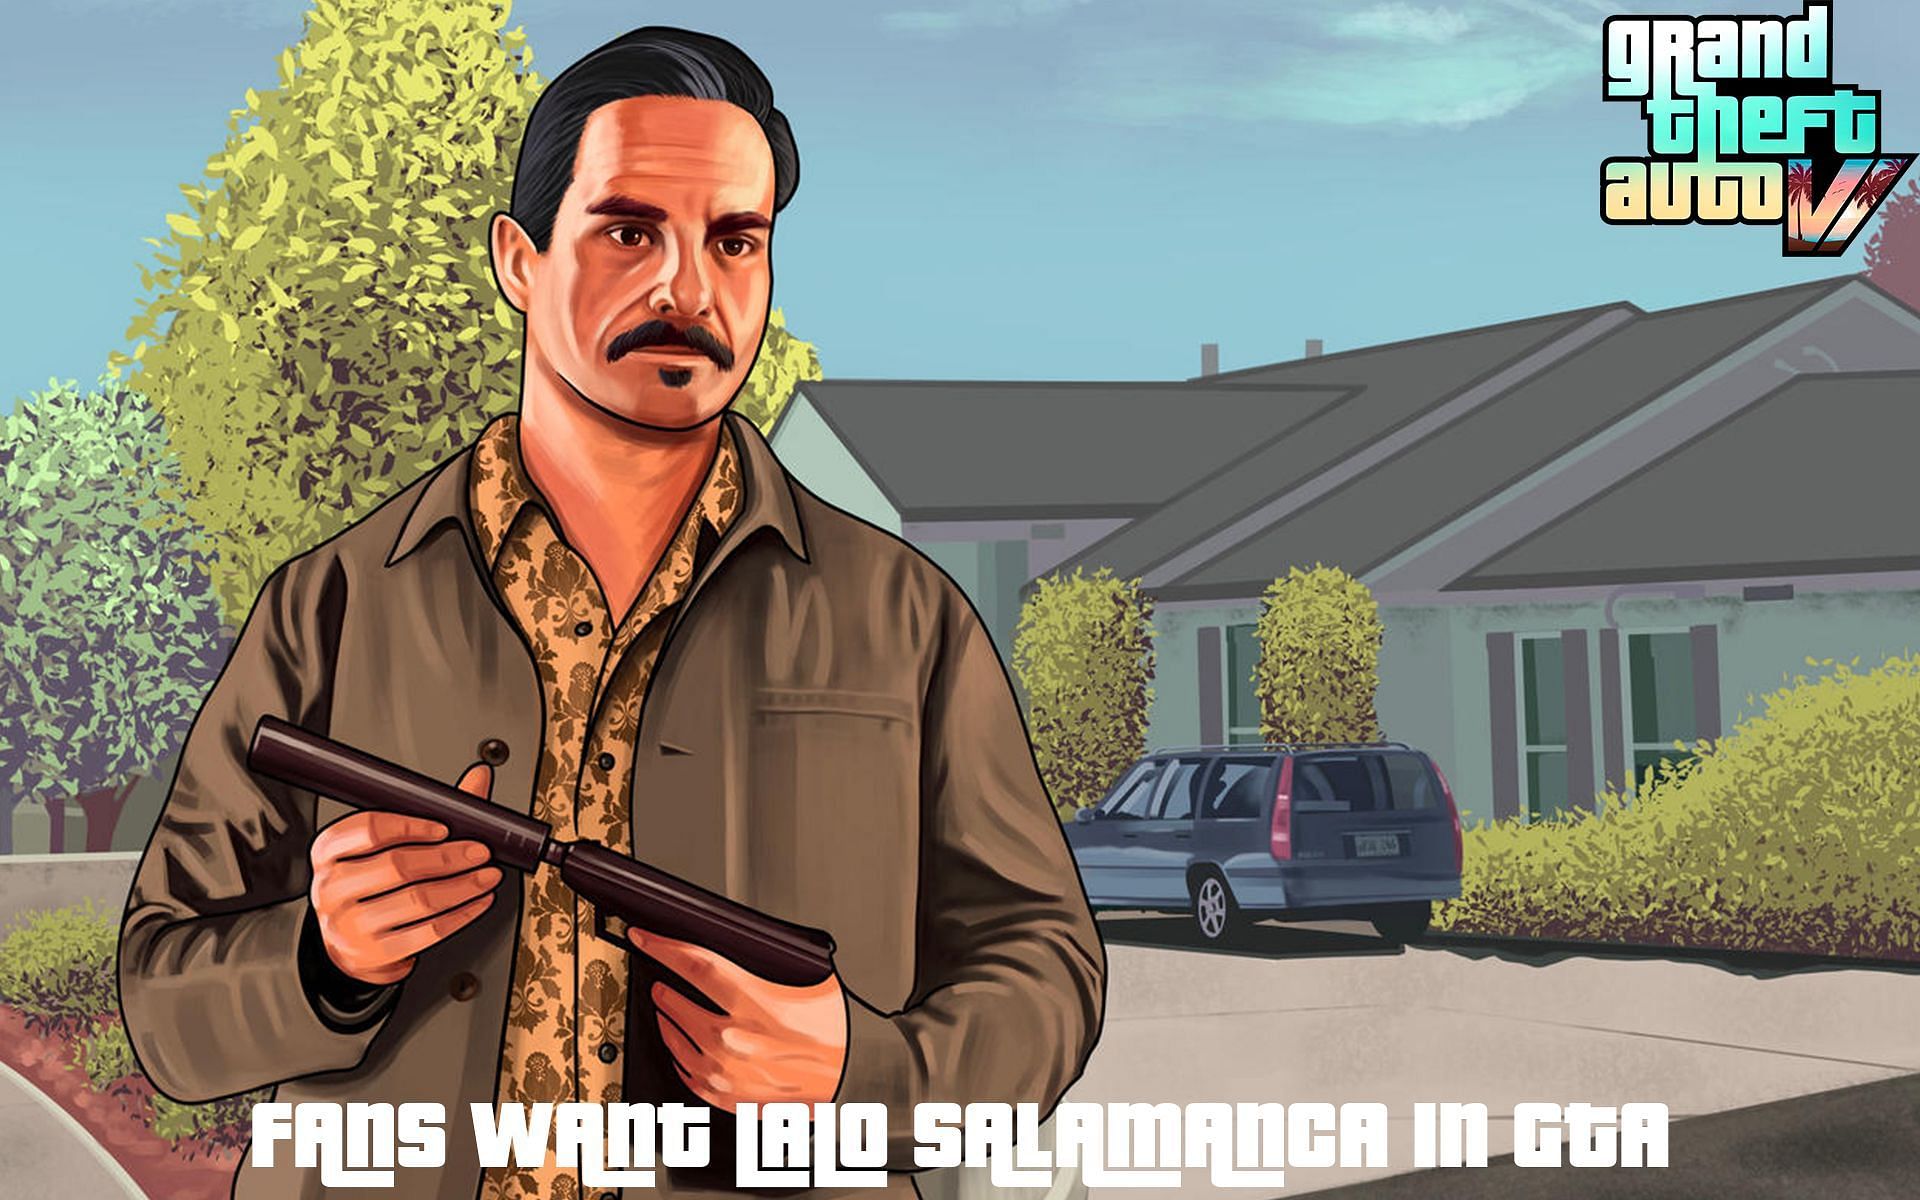 GTA fans really want a crossover with the Breaking Bad universe (Image via Sportskeeda)